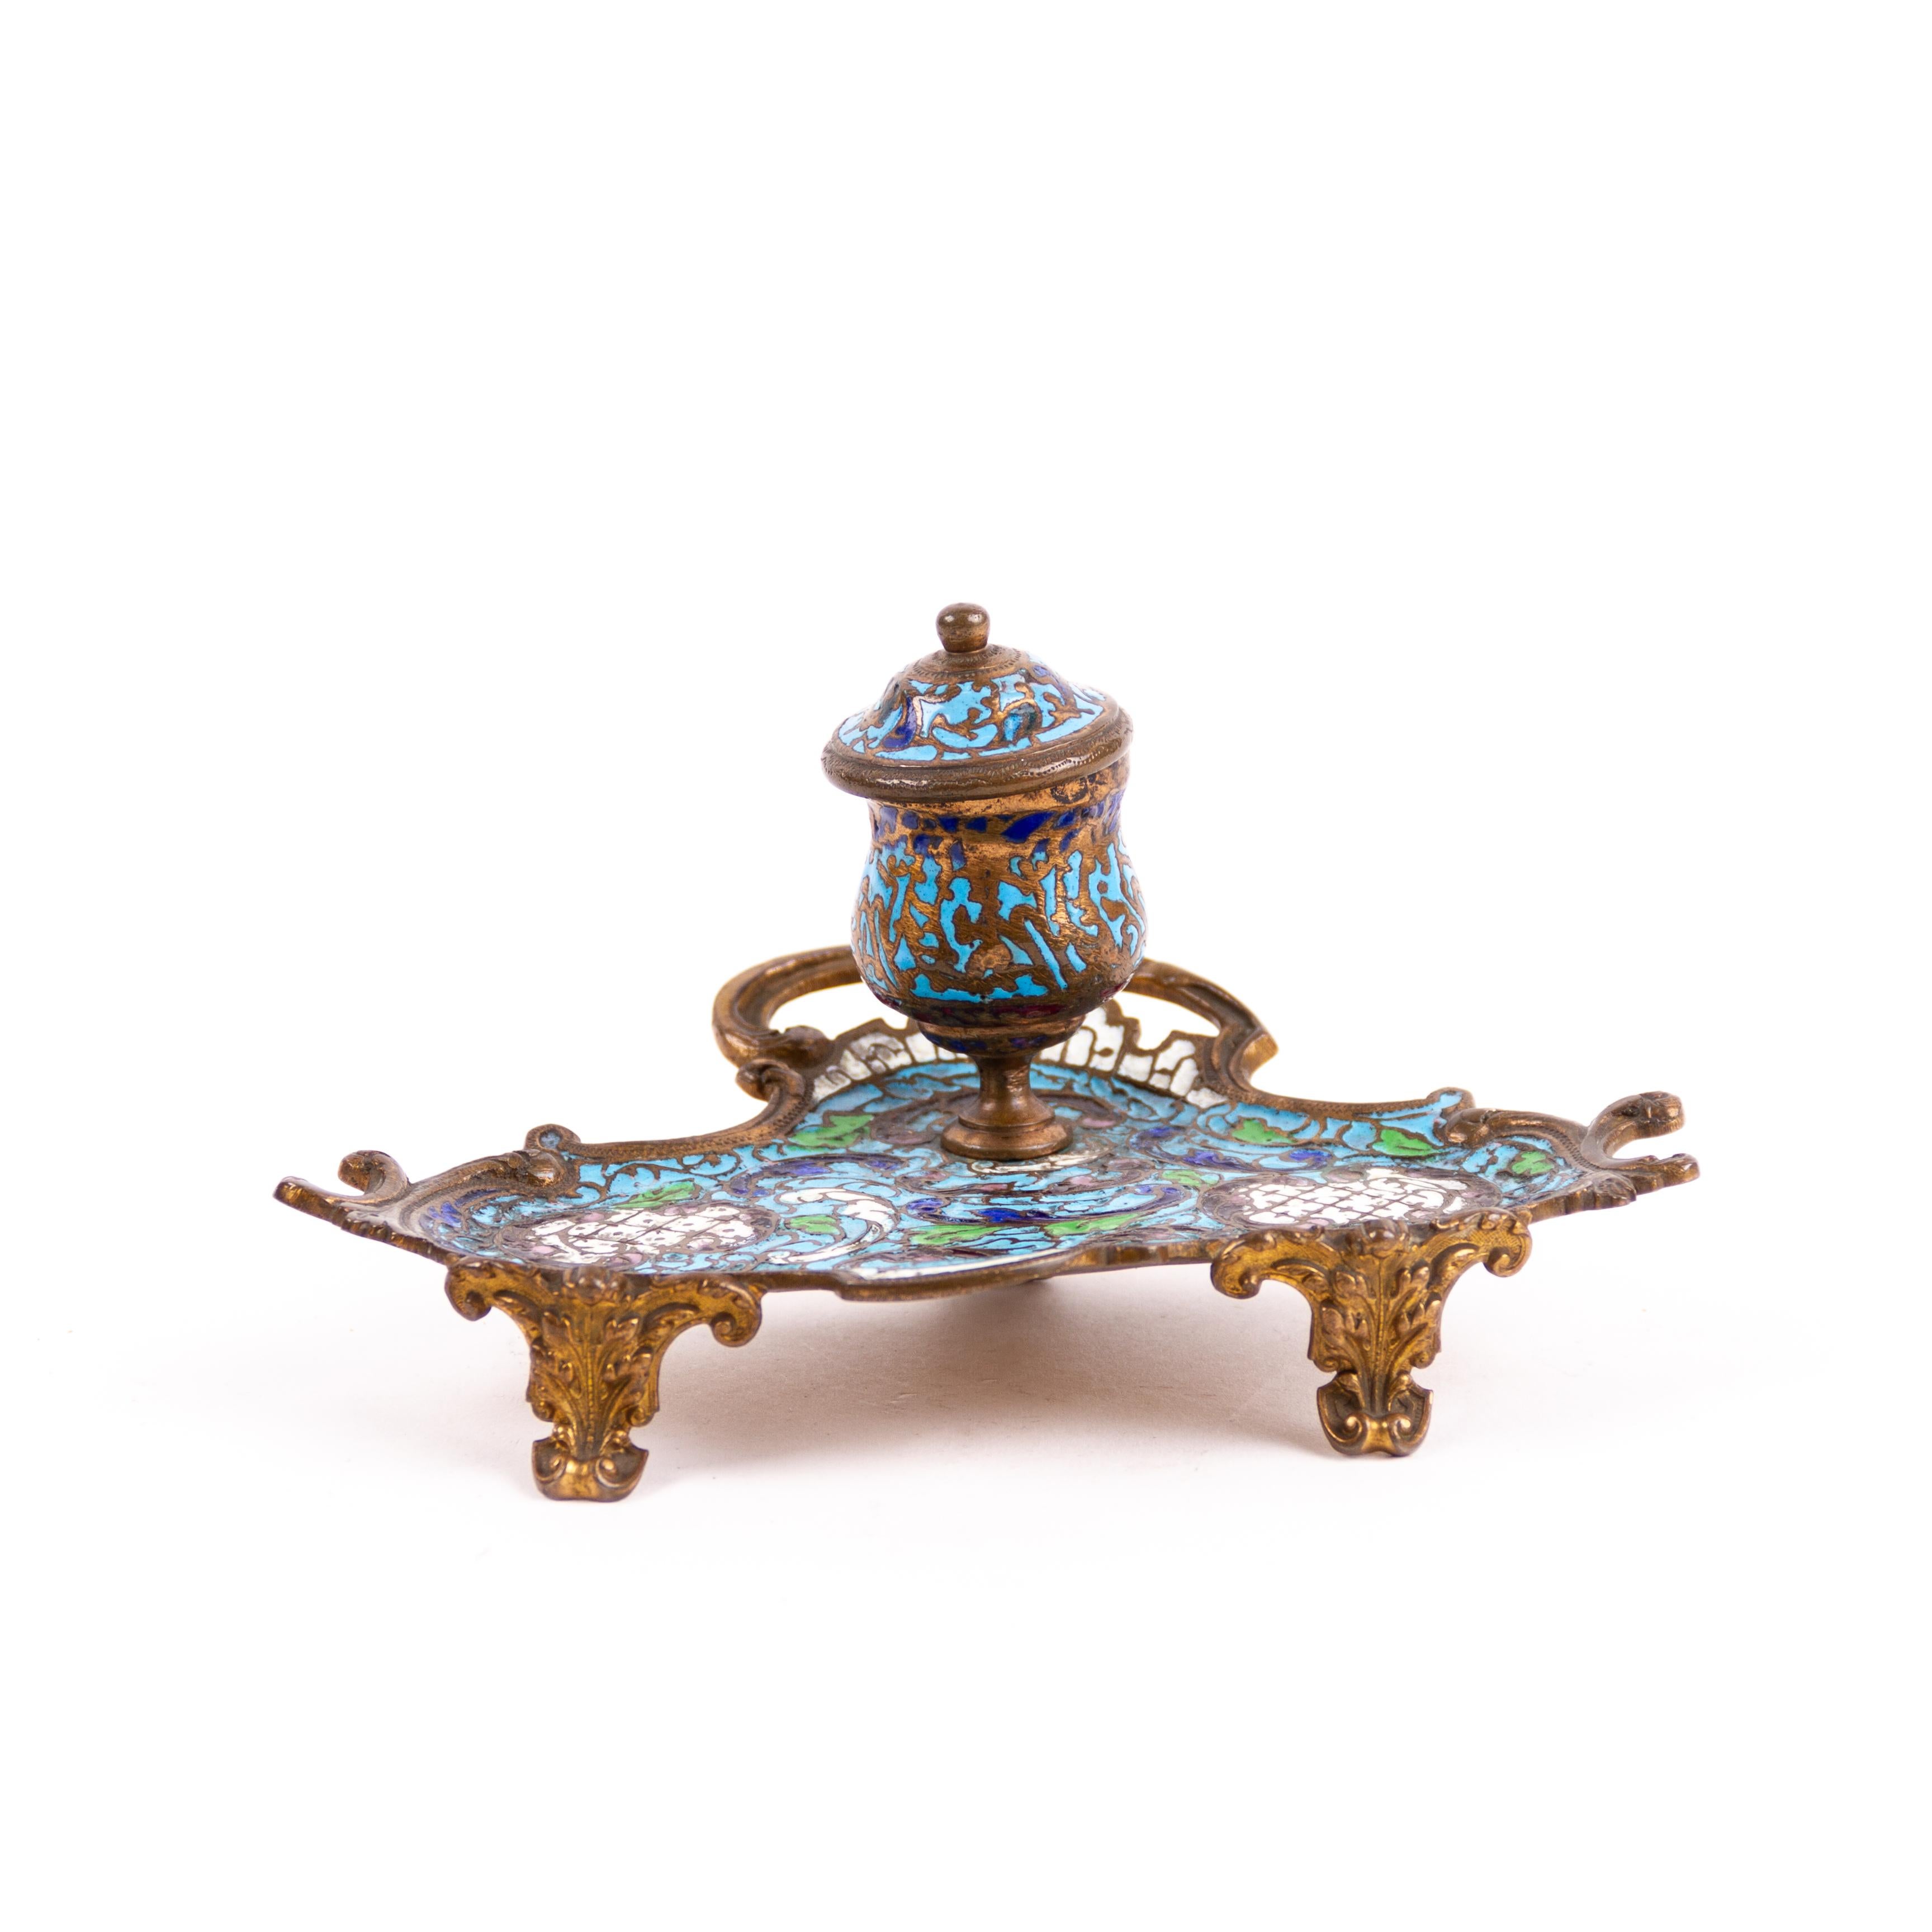 Enamel Bronze French Inkwell 19th Century 
Good condition overall, as seen.

Free international shipping.